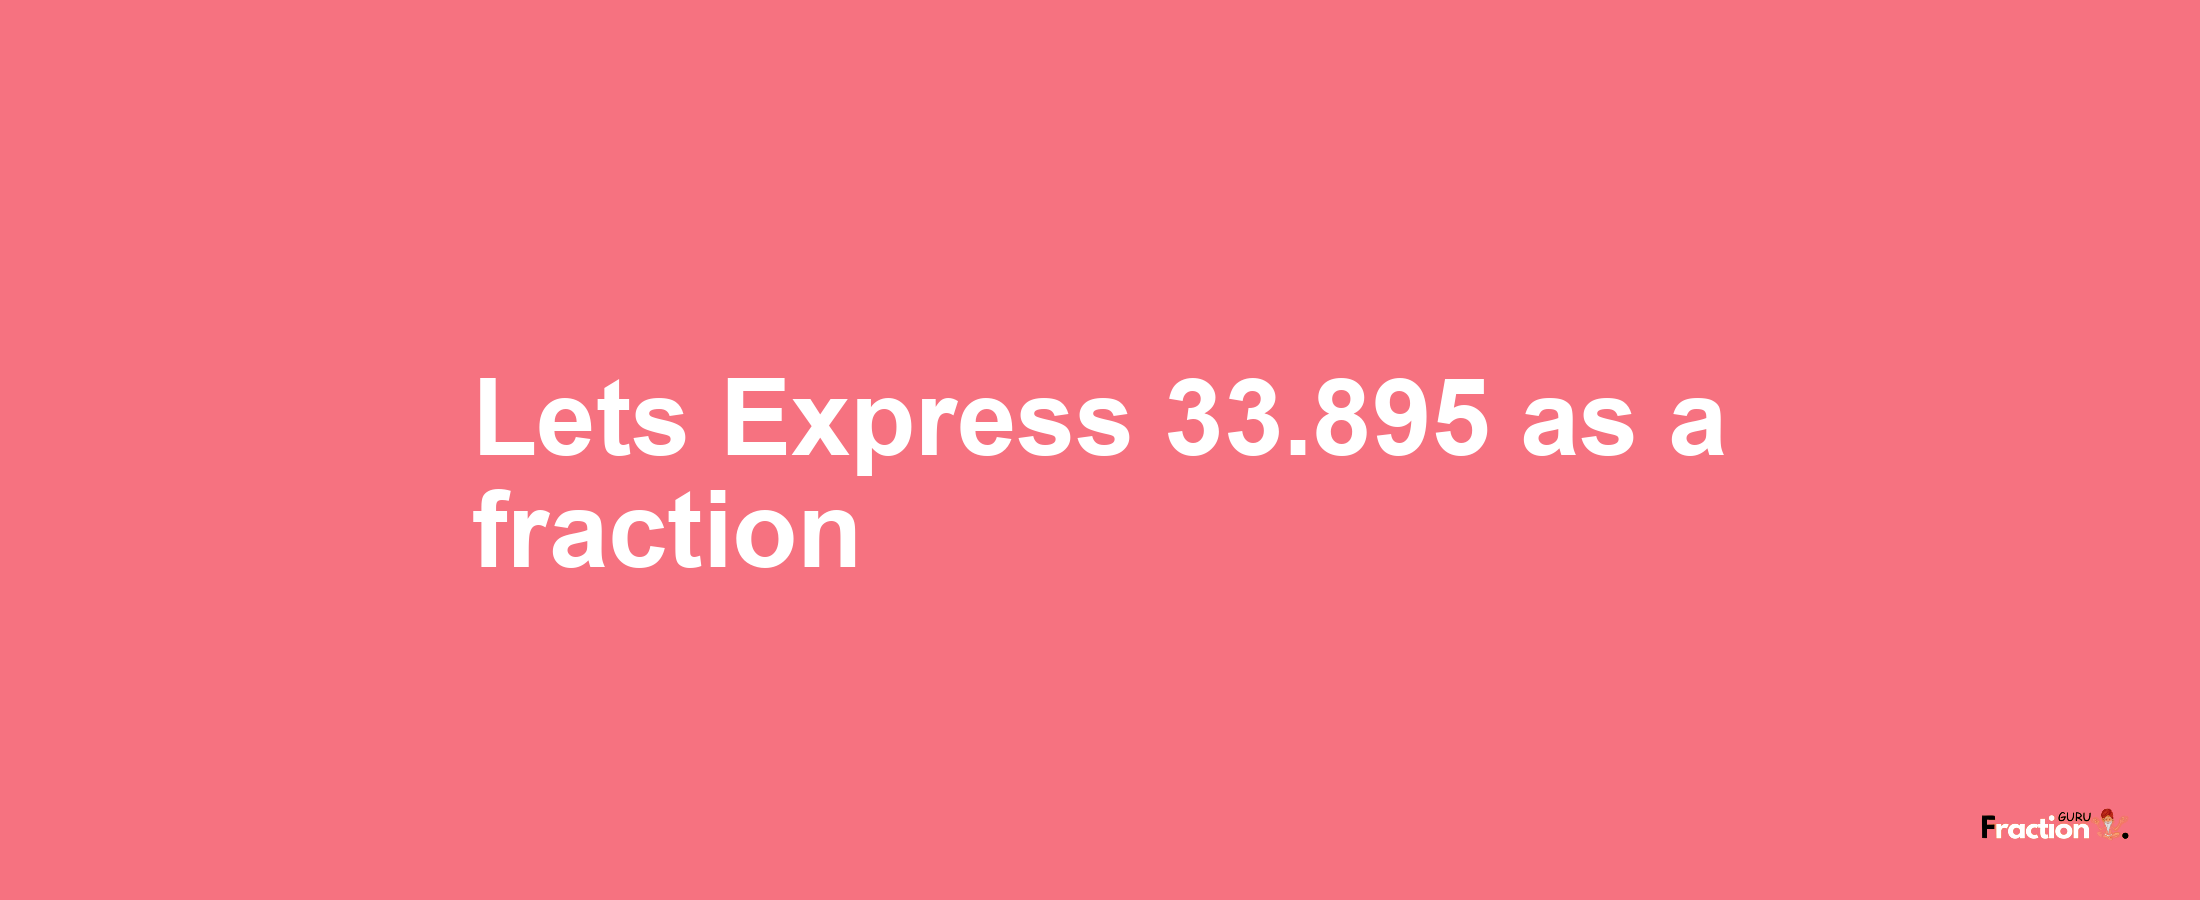 Lets Express 33.895 as afraction